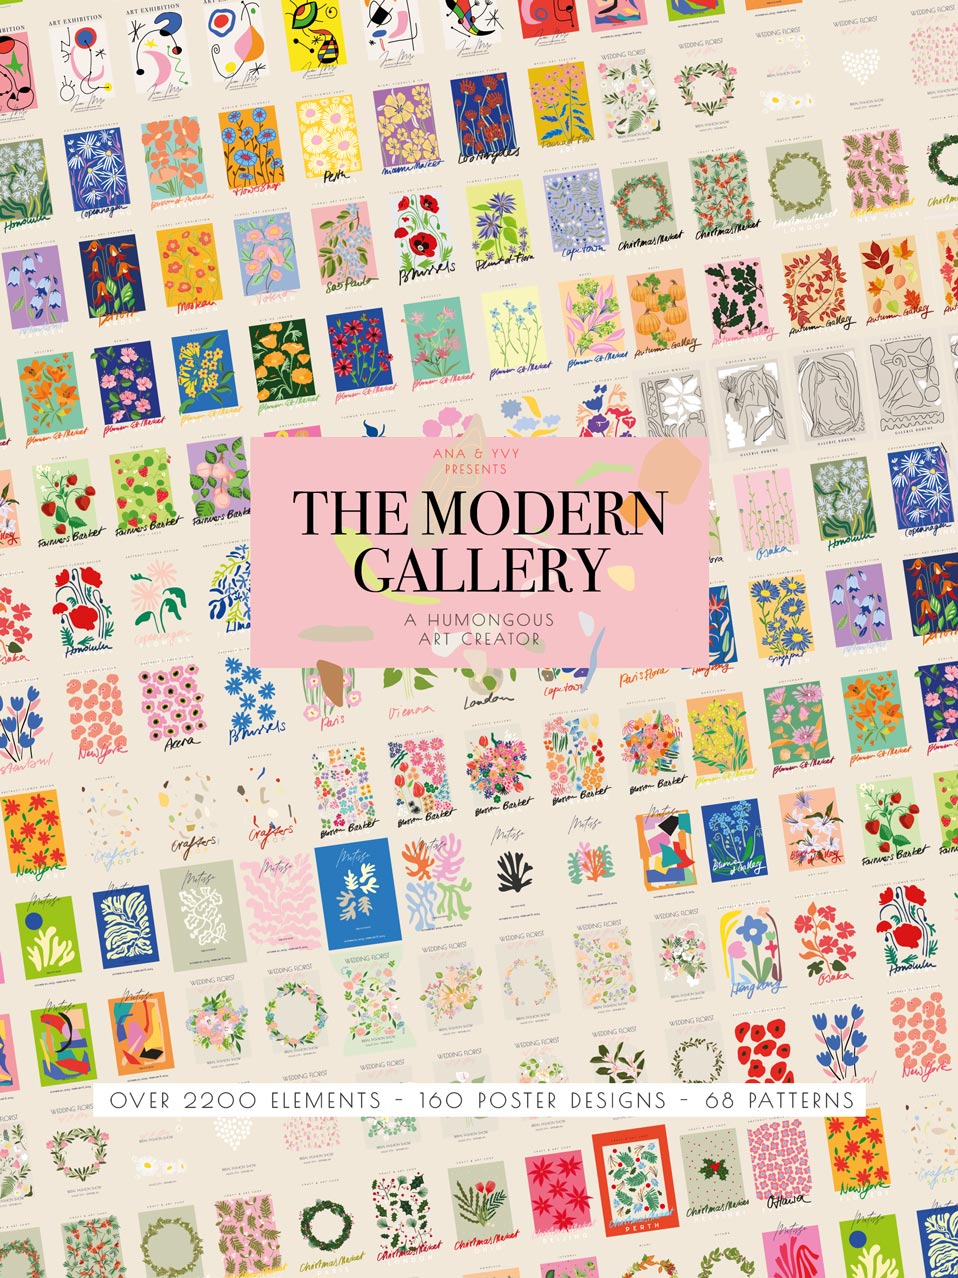 The Modern Gallery | Print & Poster - ANA & YVY